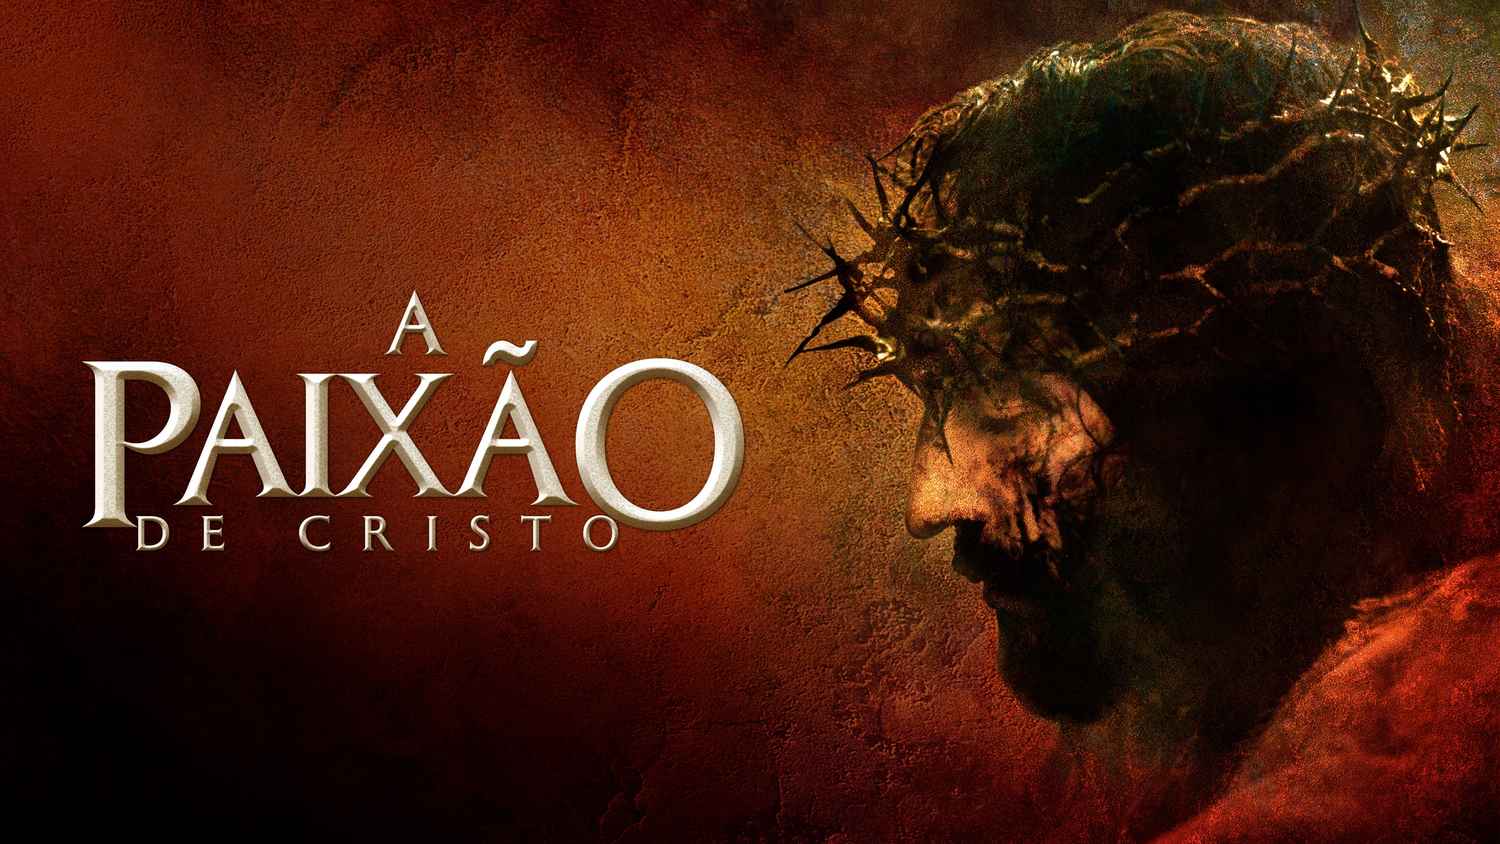 watch the passion of christ movie online for free